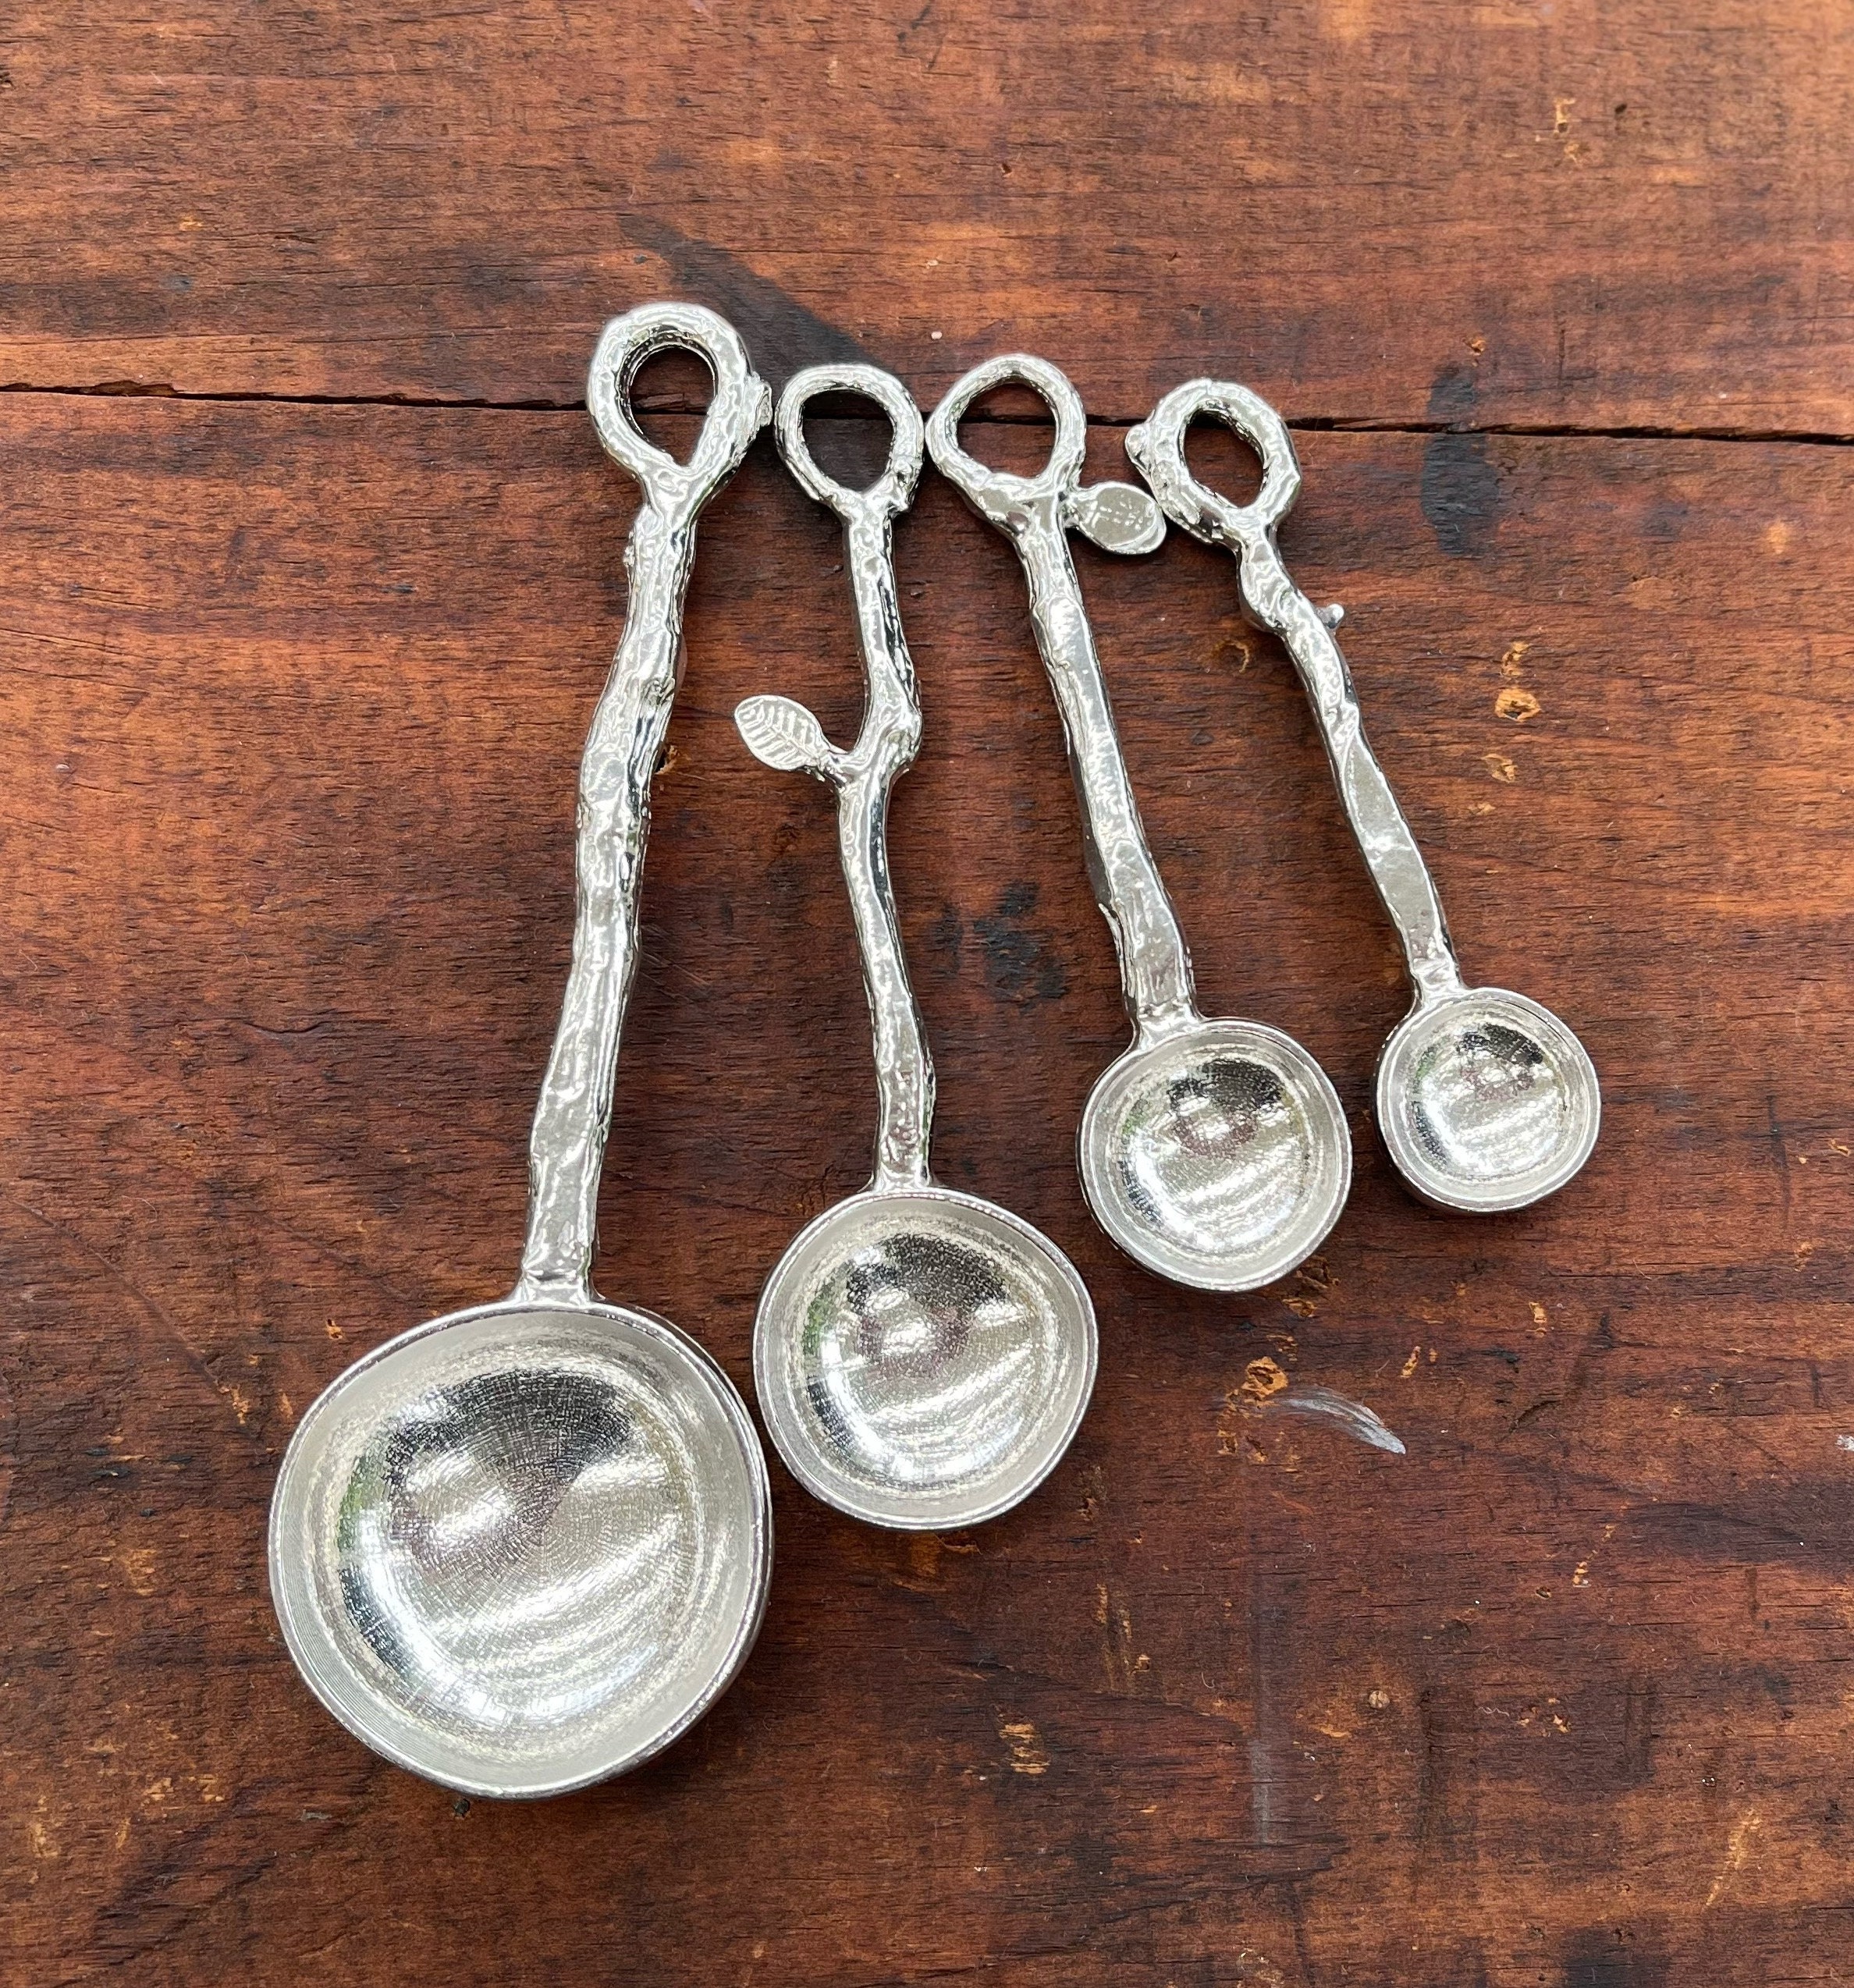 Crosby and Taylor Roman Pewter Measuring Spoons – The Barrington